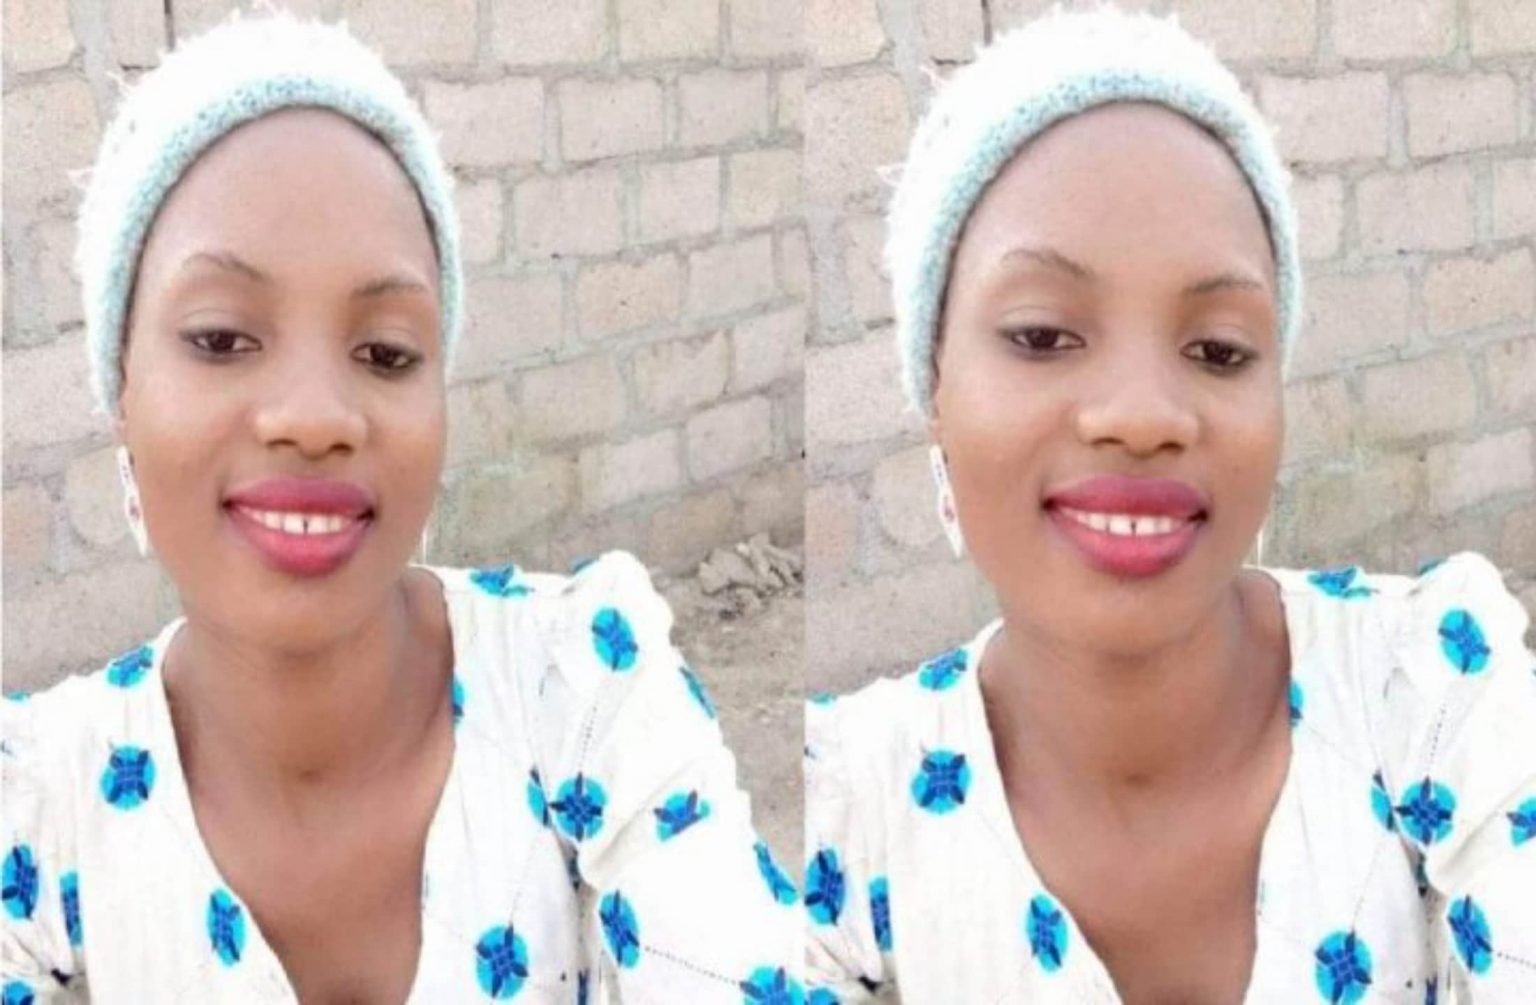 No One Can Fight For God In Such Bestial Manner – Afenifere Demands Justice For Slain Sokoto Student, Deborah